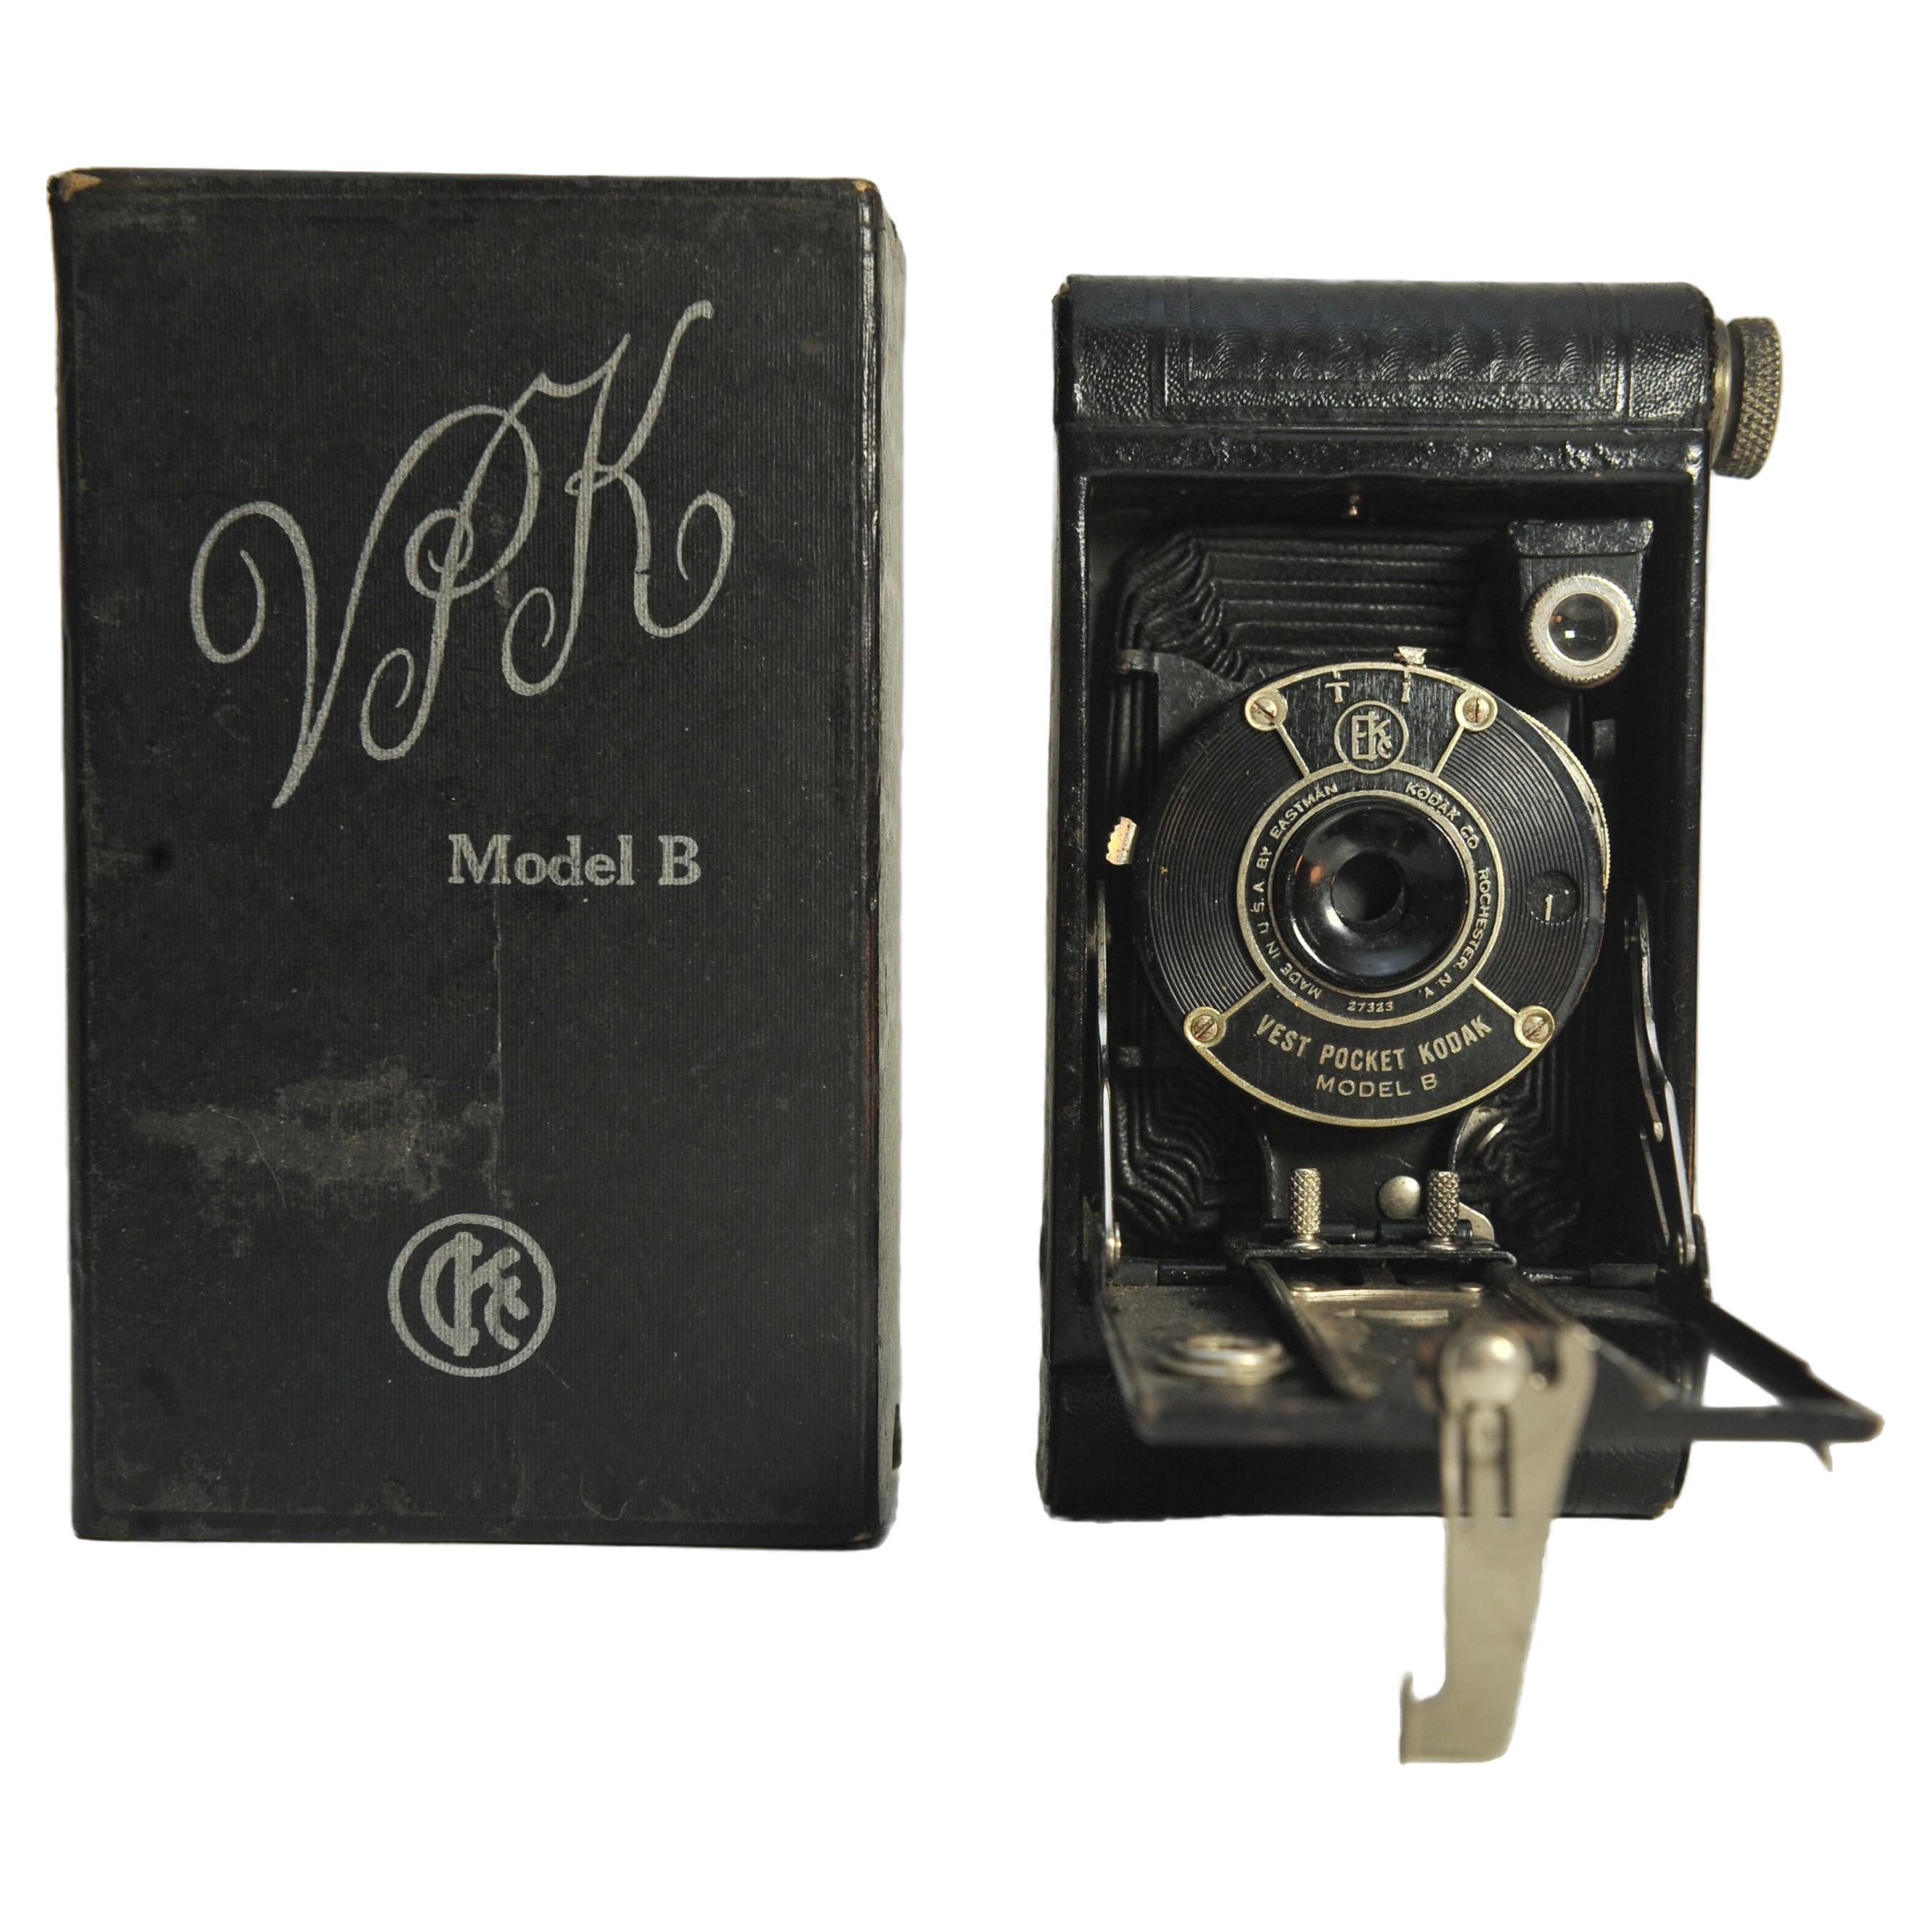 Eastman Kodak Vest Pocket Model B 127 Film Folding Camera With Original Box 1925 In Good Condition For Sale In High Wycombe, GB